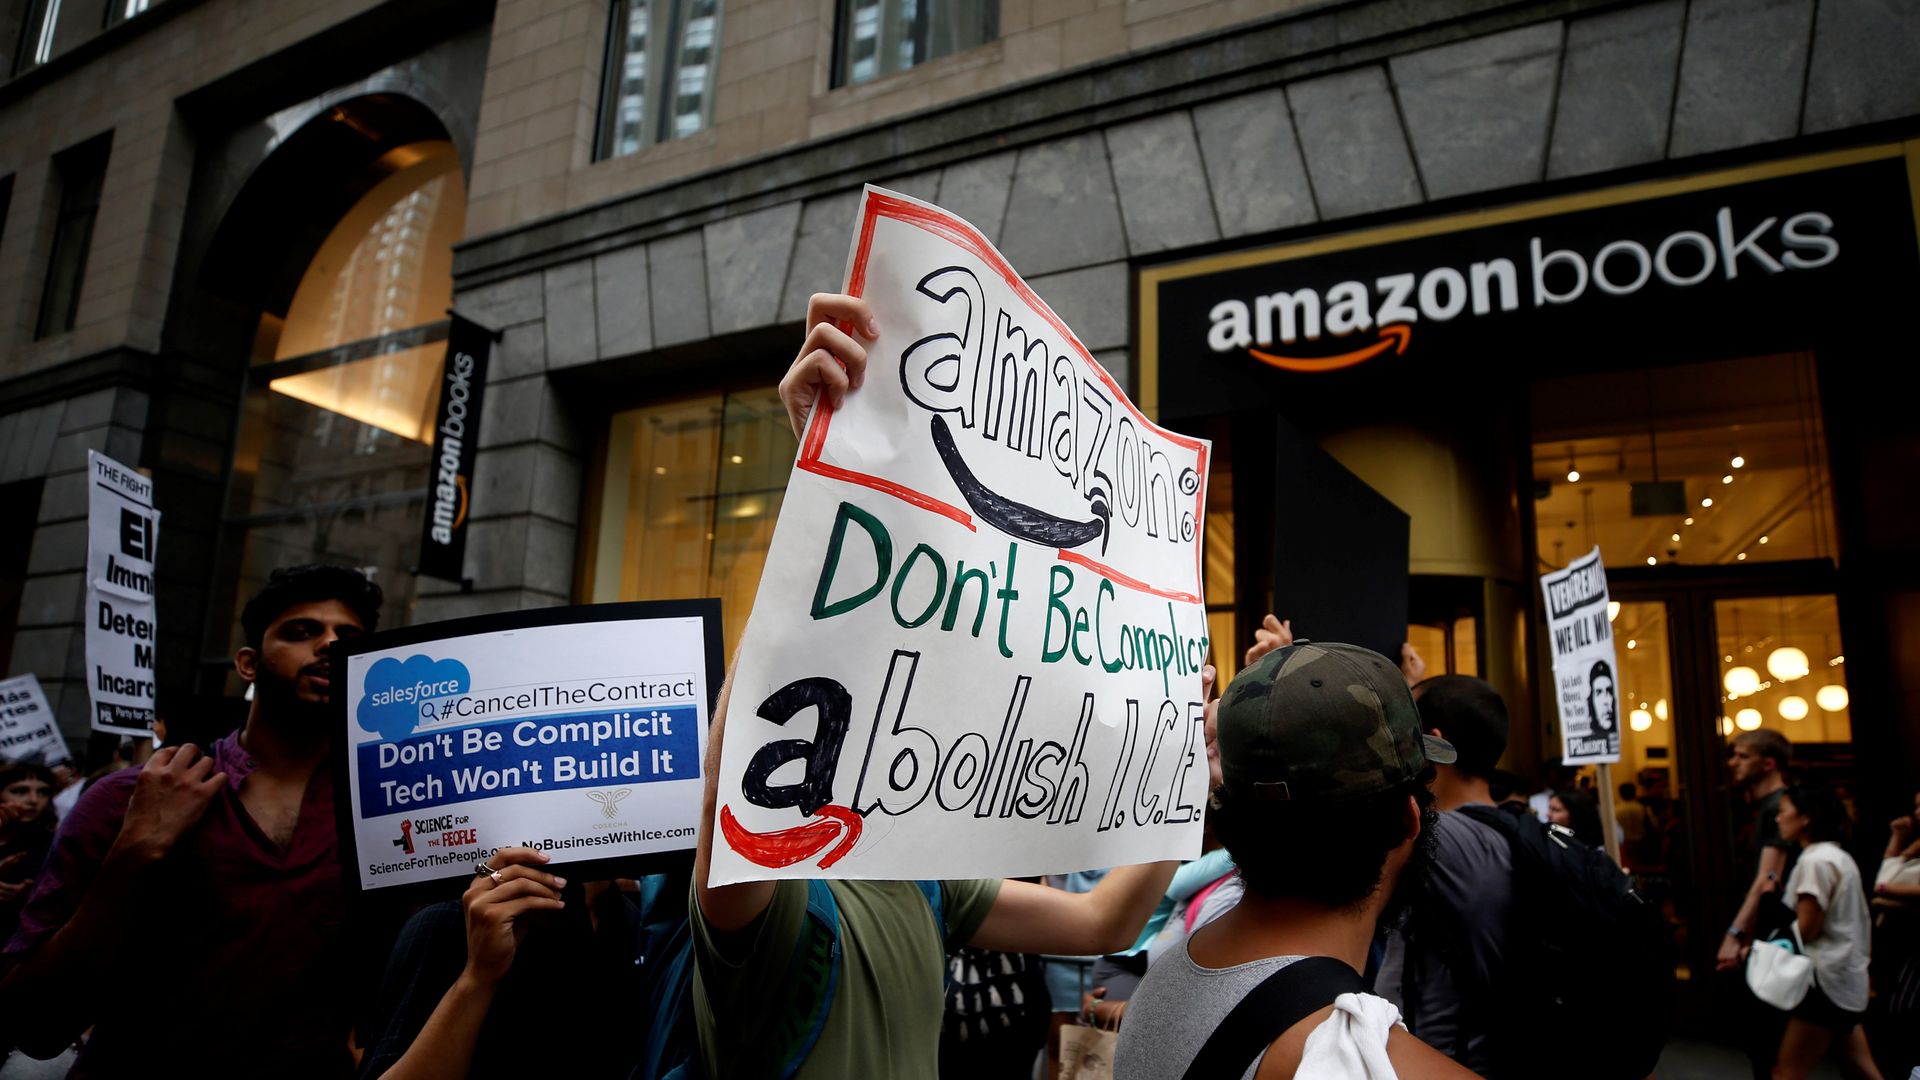 Protesters hold anti-ICE signs in front of an Amazon bookstore